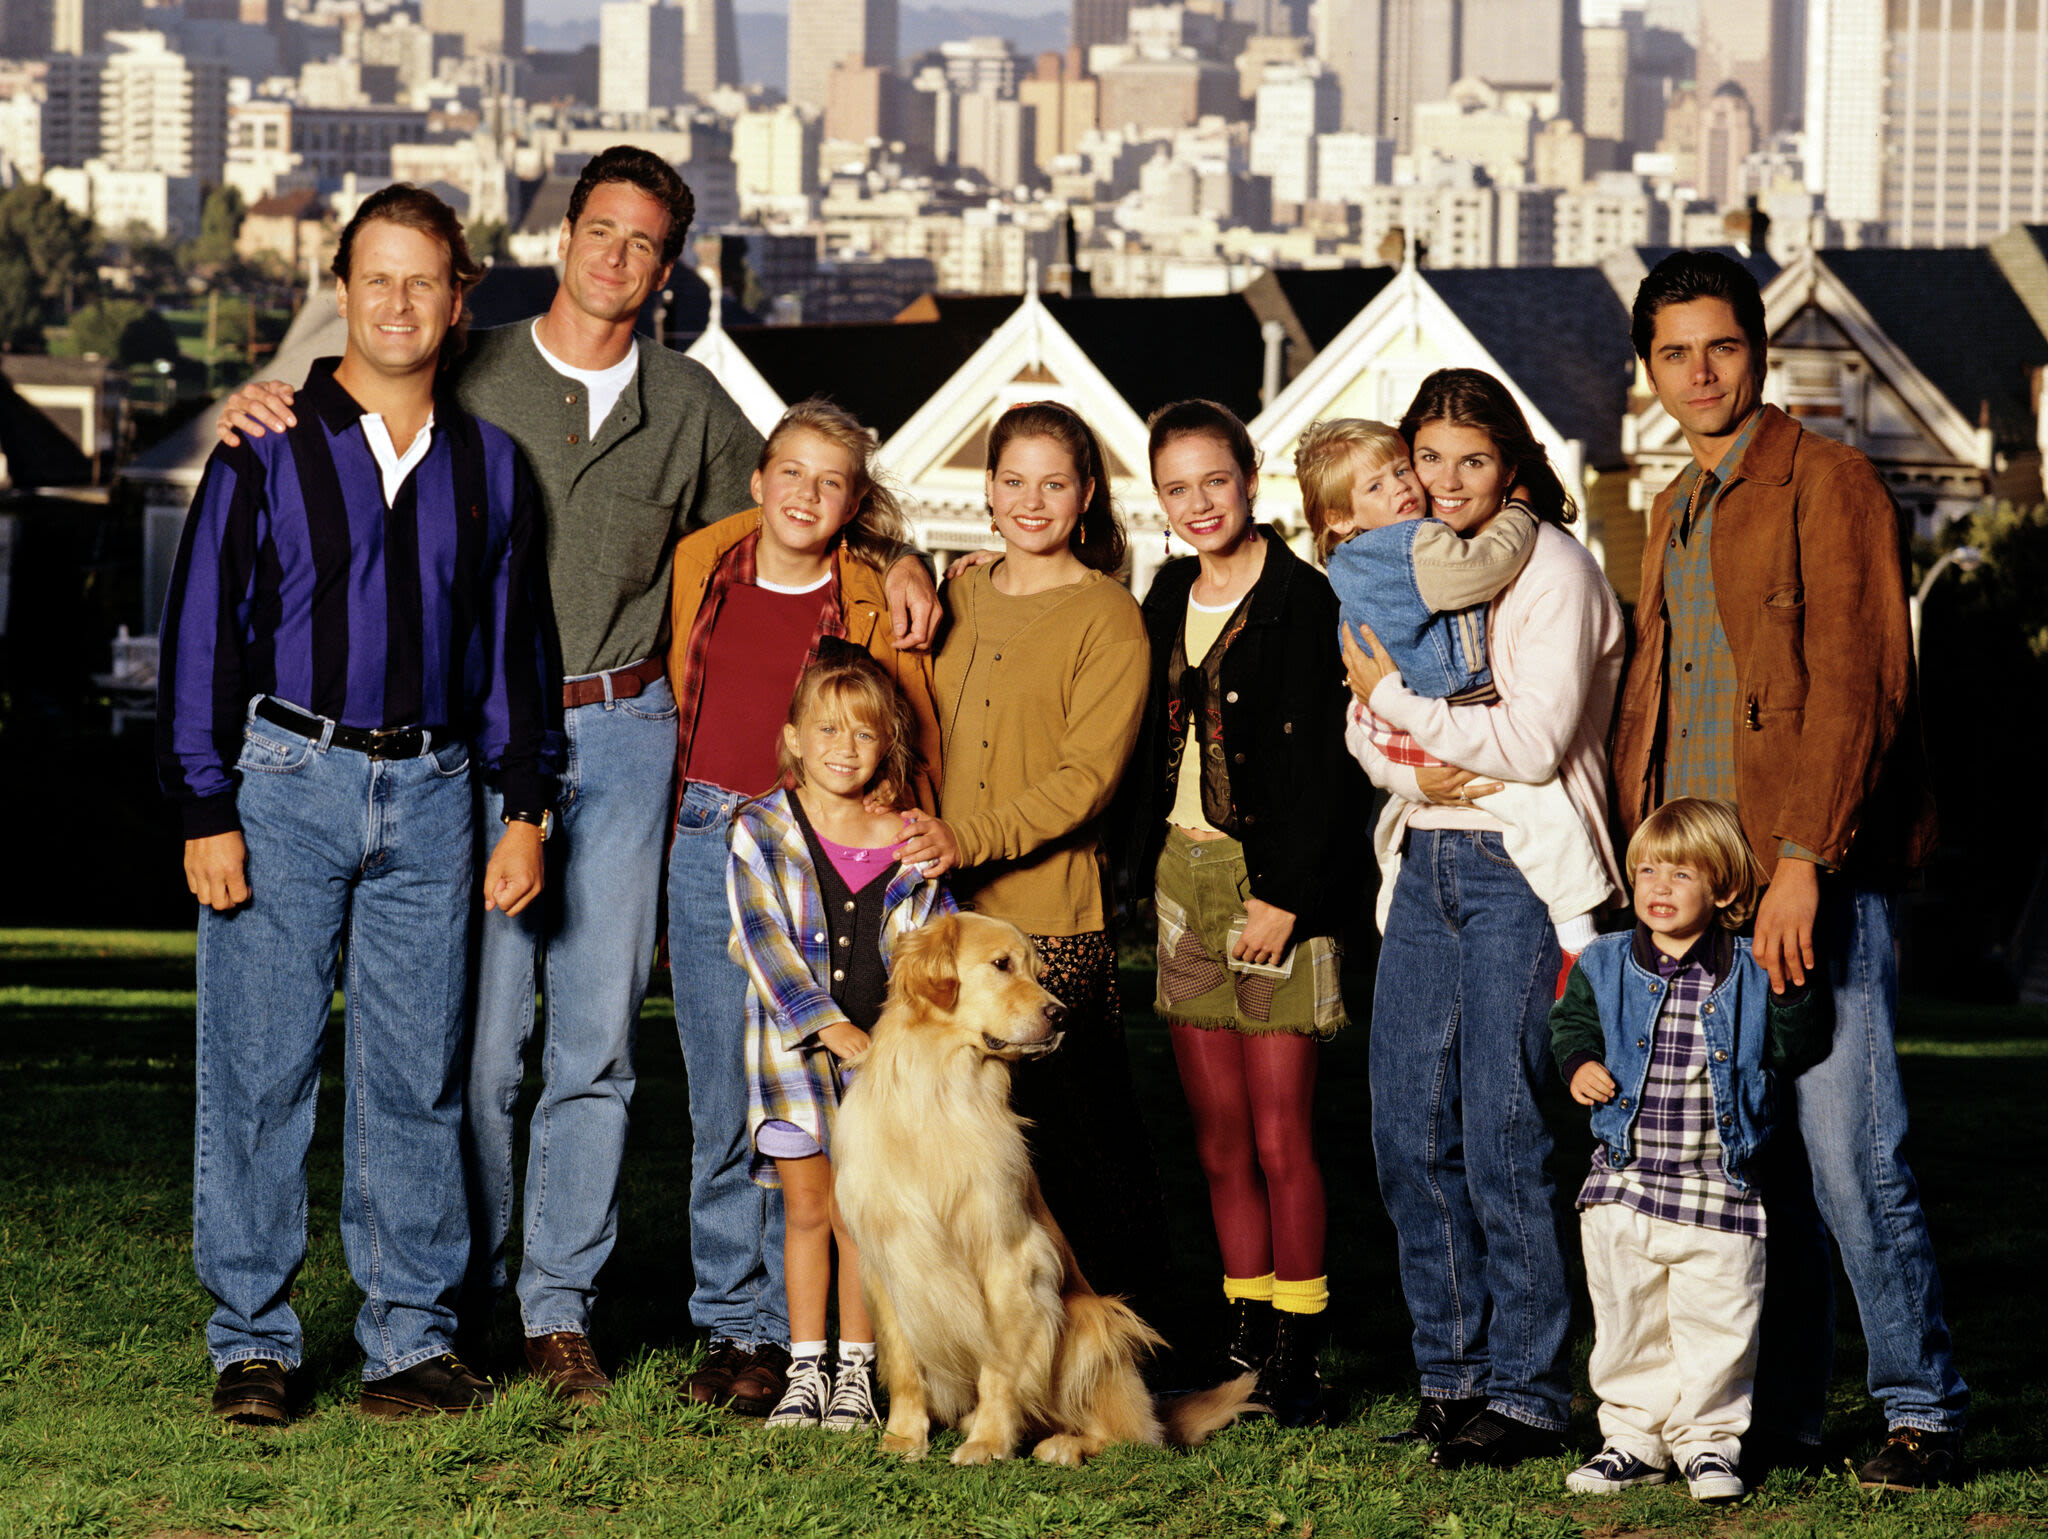 'Full House' star reveals the show's secret weed reference